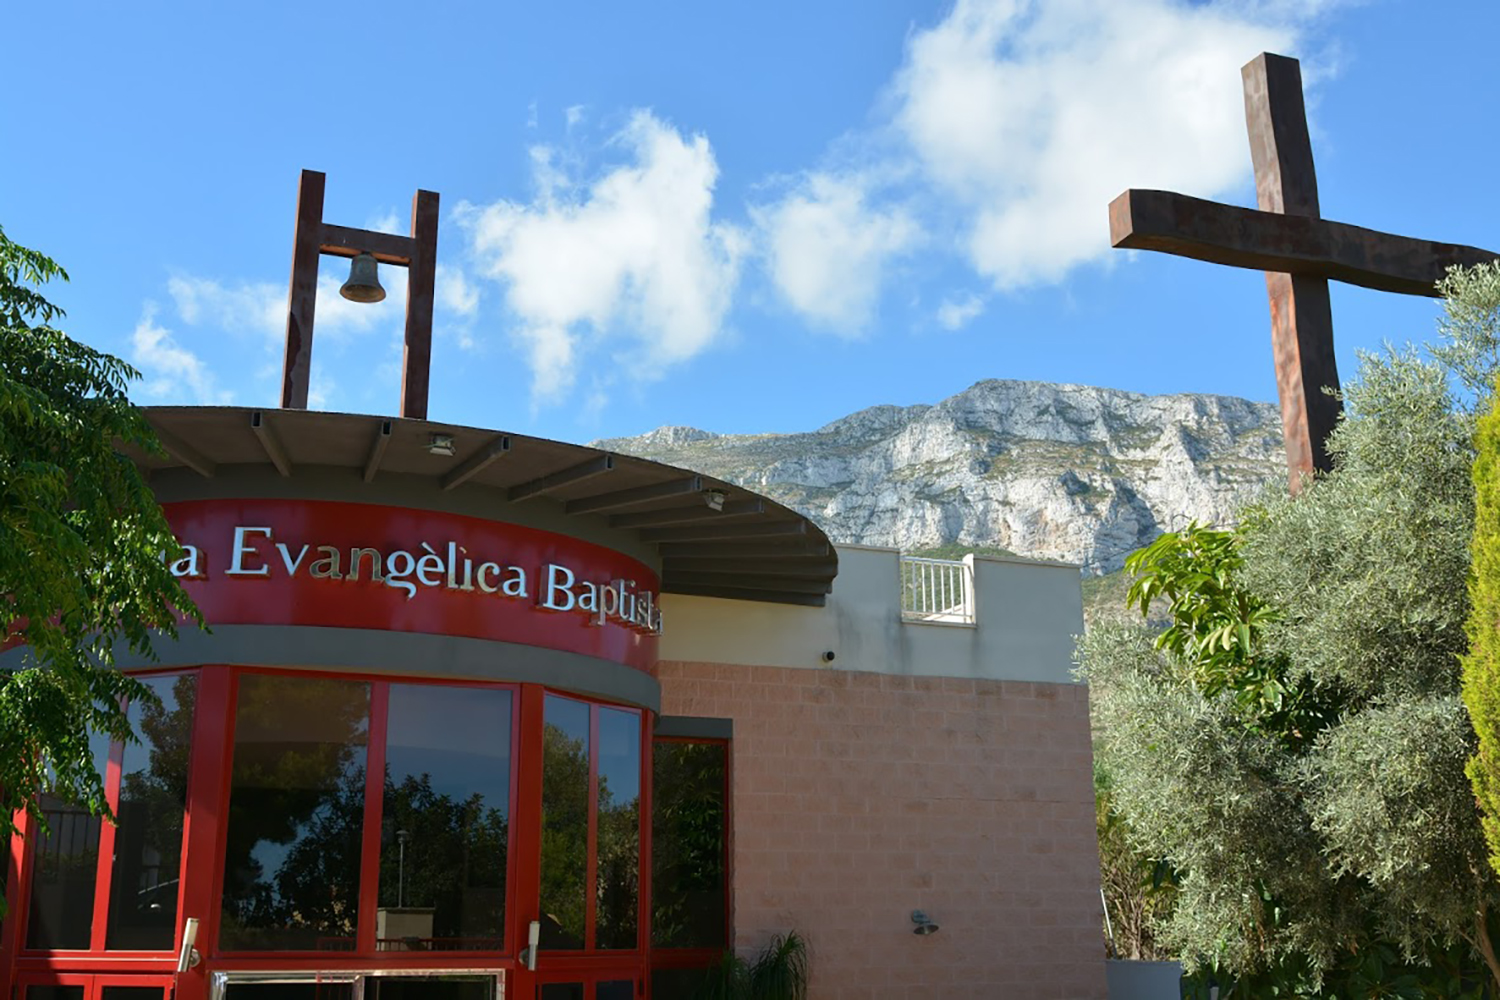 Iglesia Evangelica Bautista in Cerdanyola, Spain, is known to its neighbors for its social services and feeding program. The Baptist congregation also supplies food and other items to refugees in other European nations. (Photo/Kalie Lowrie/BGCT)